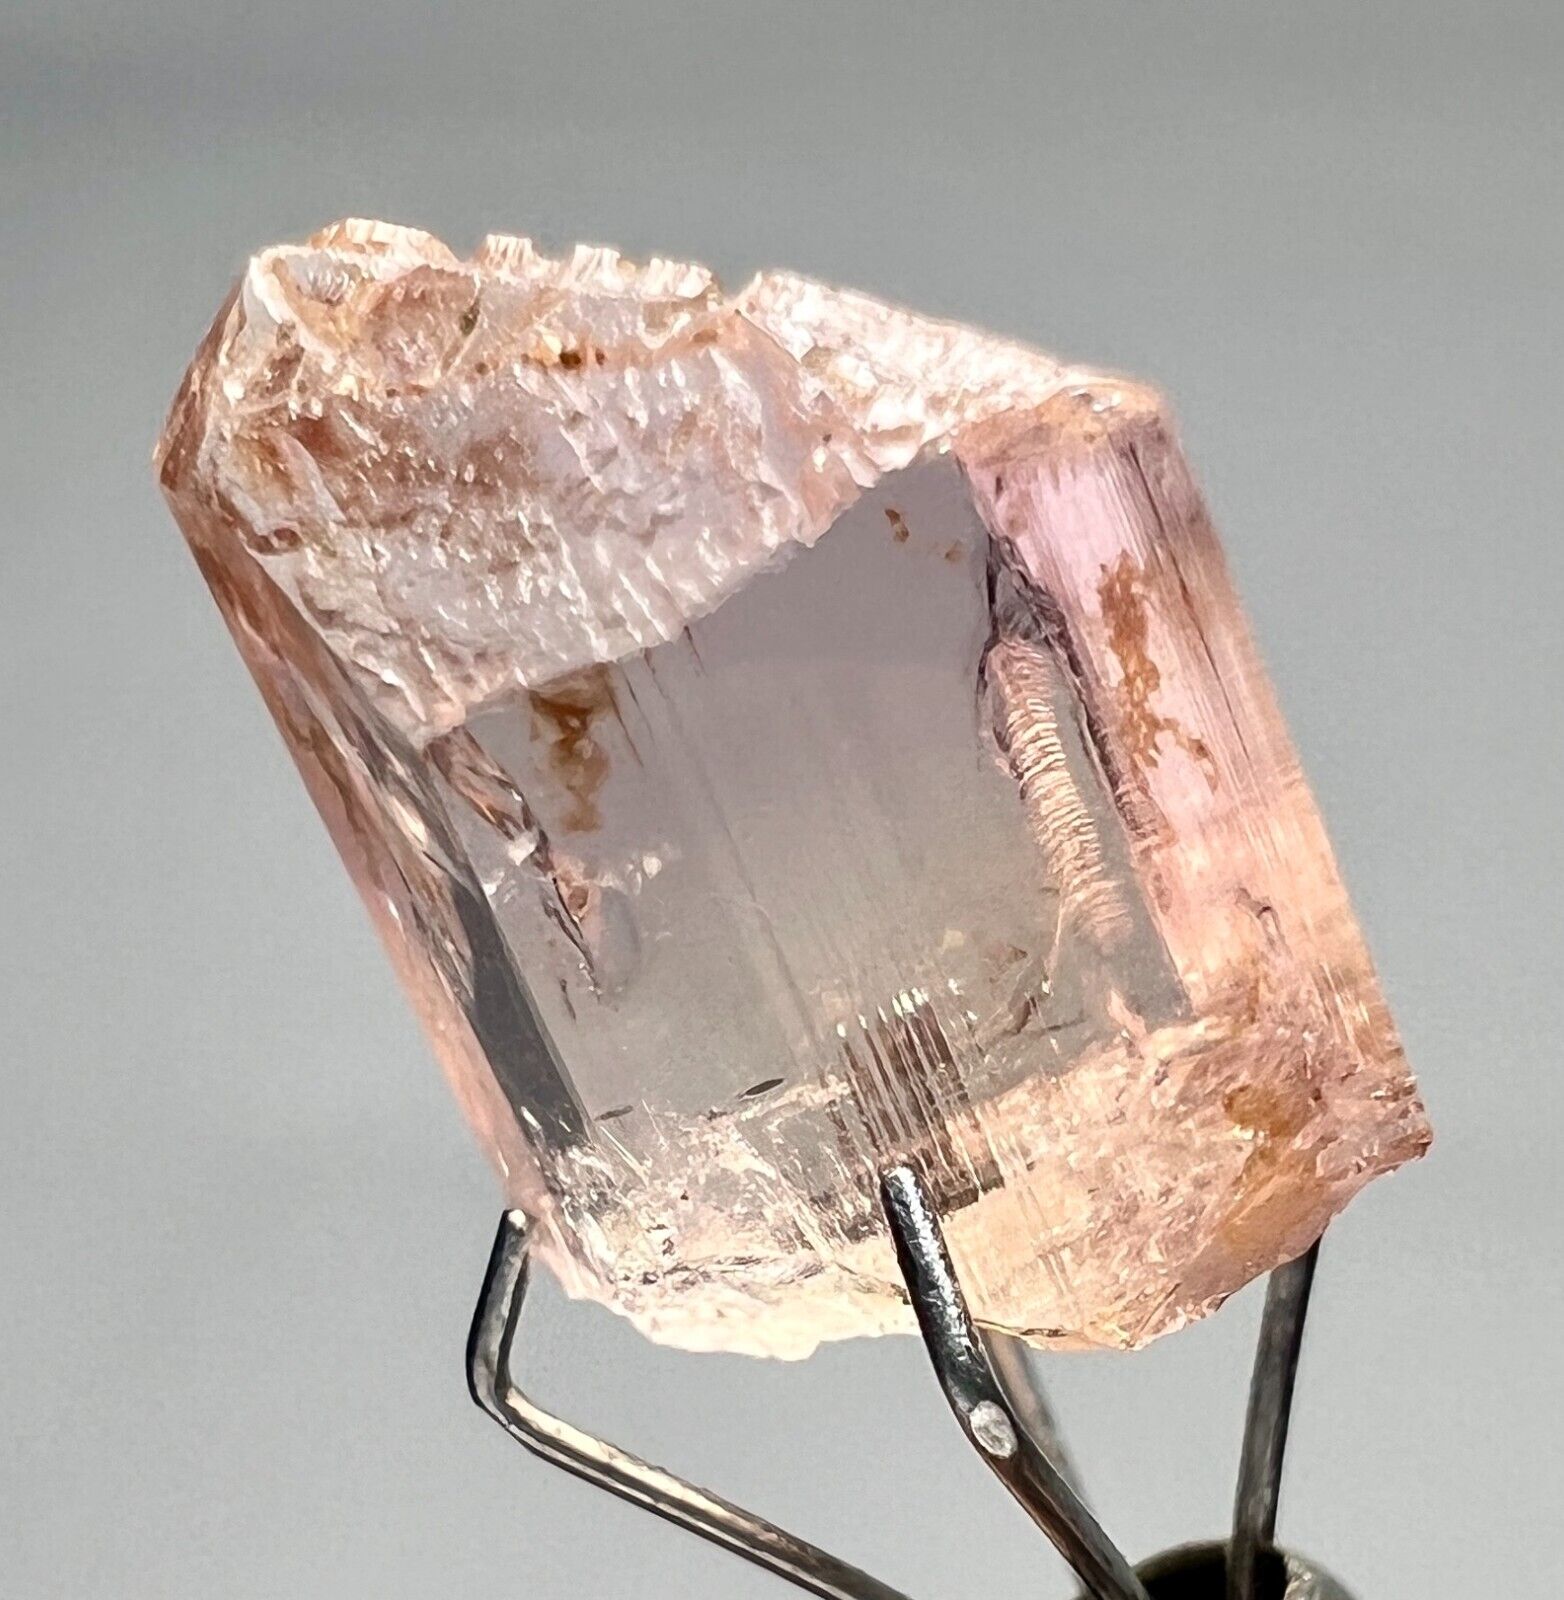 Amazing Transparent Pink Imperial Topaz Crystal From Katlang @PAK. 7.5